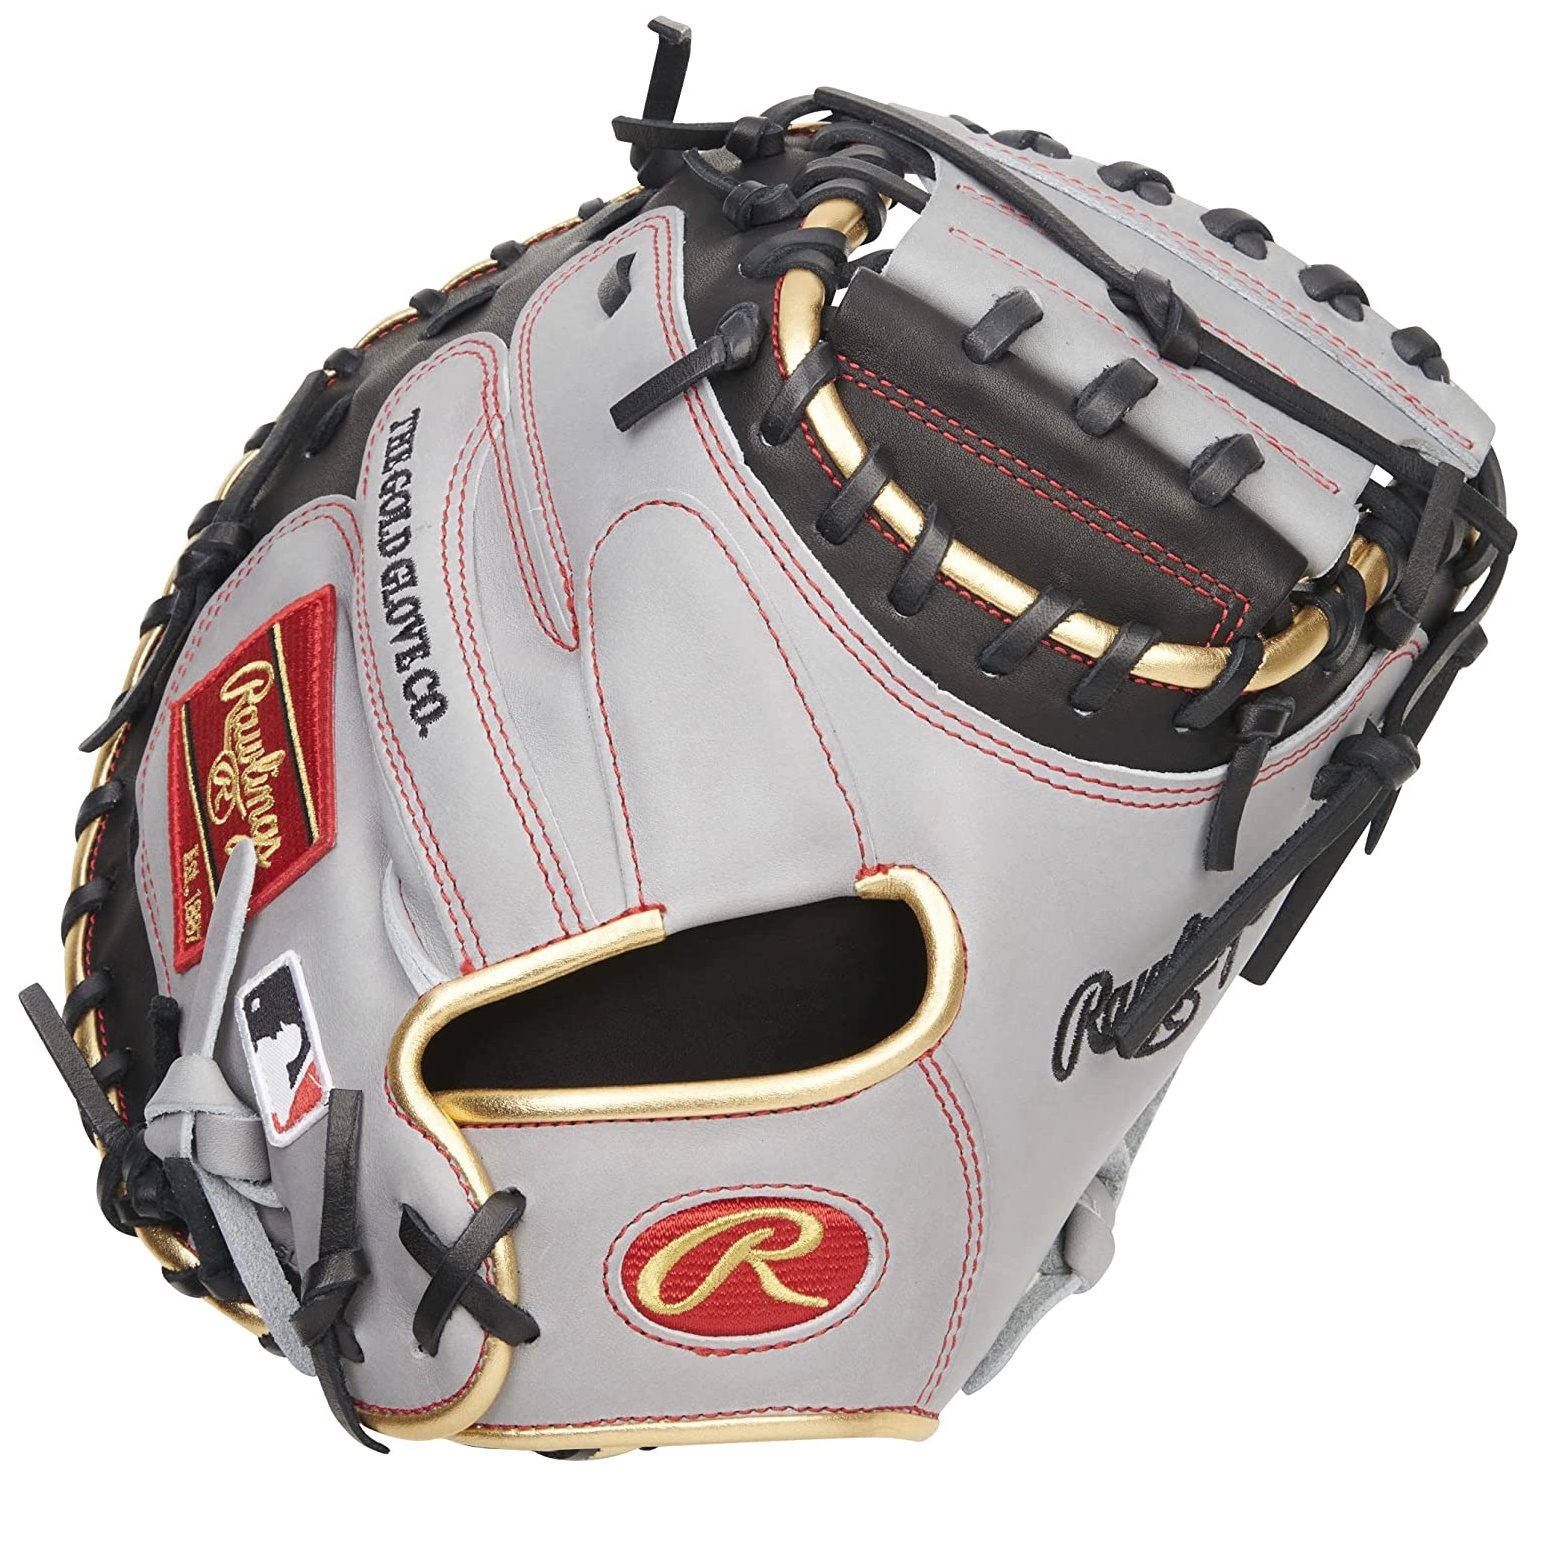 rawlings-heart-of-the-hide-baseball-catchers-mitt-r2g-narrow-fit-gary-sanchez-33-inch-one-piece-closed-web-right-hand-throw PRORCM33-23BGS-RightHandThrow Rawlings  <p>Constructed from Rawlings world-renowned Heart of the Hide steer leather.</p> <p>Taken